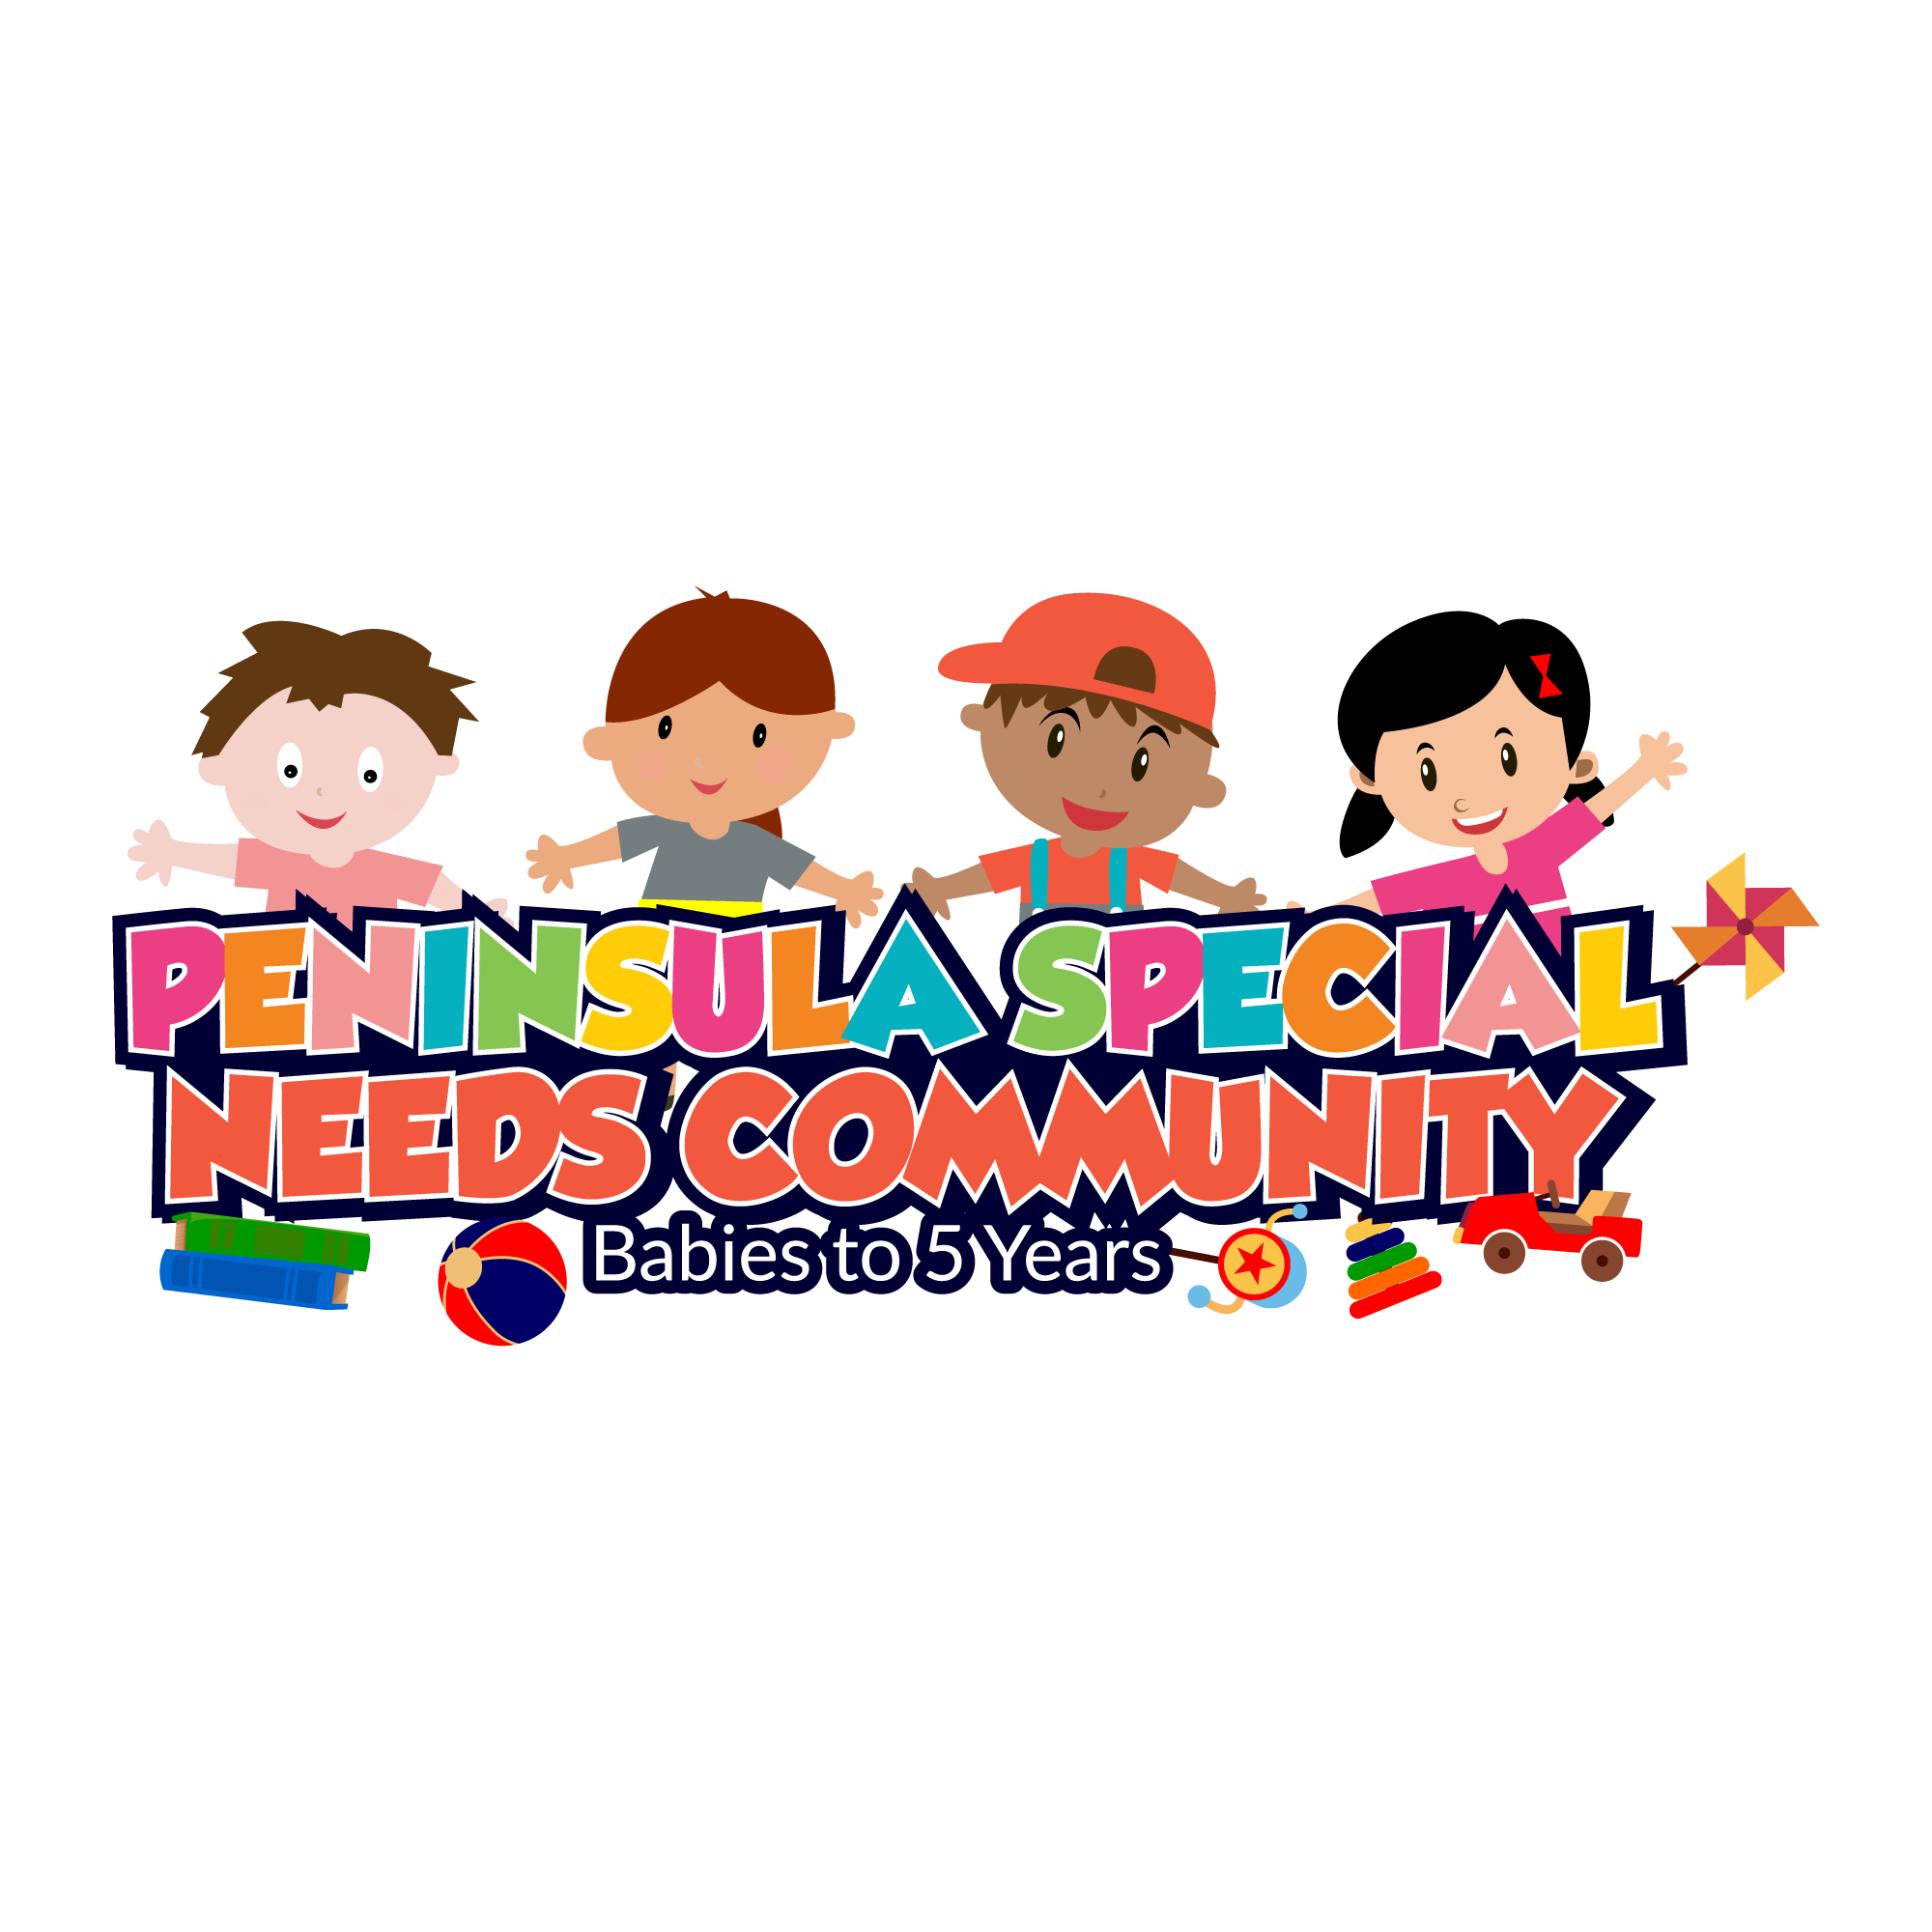 Peninsula Special Needs Community (Babies to 5 Years) Newly Launched!